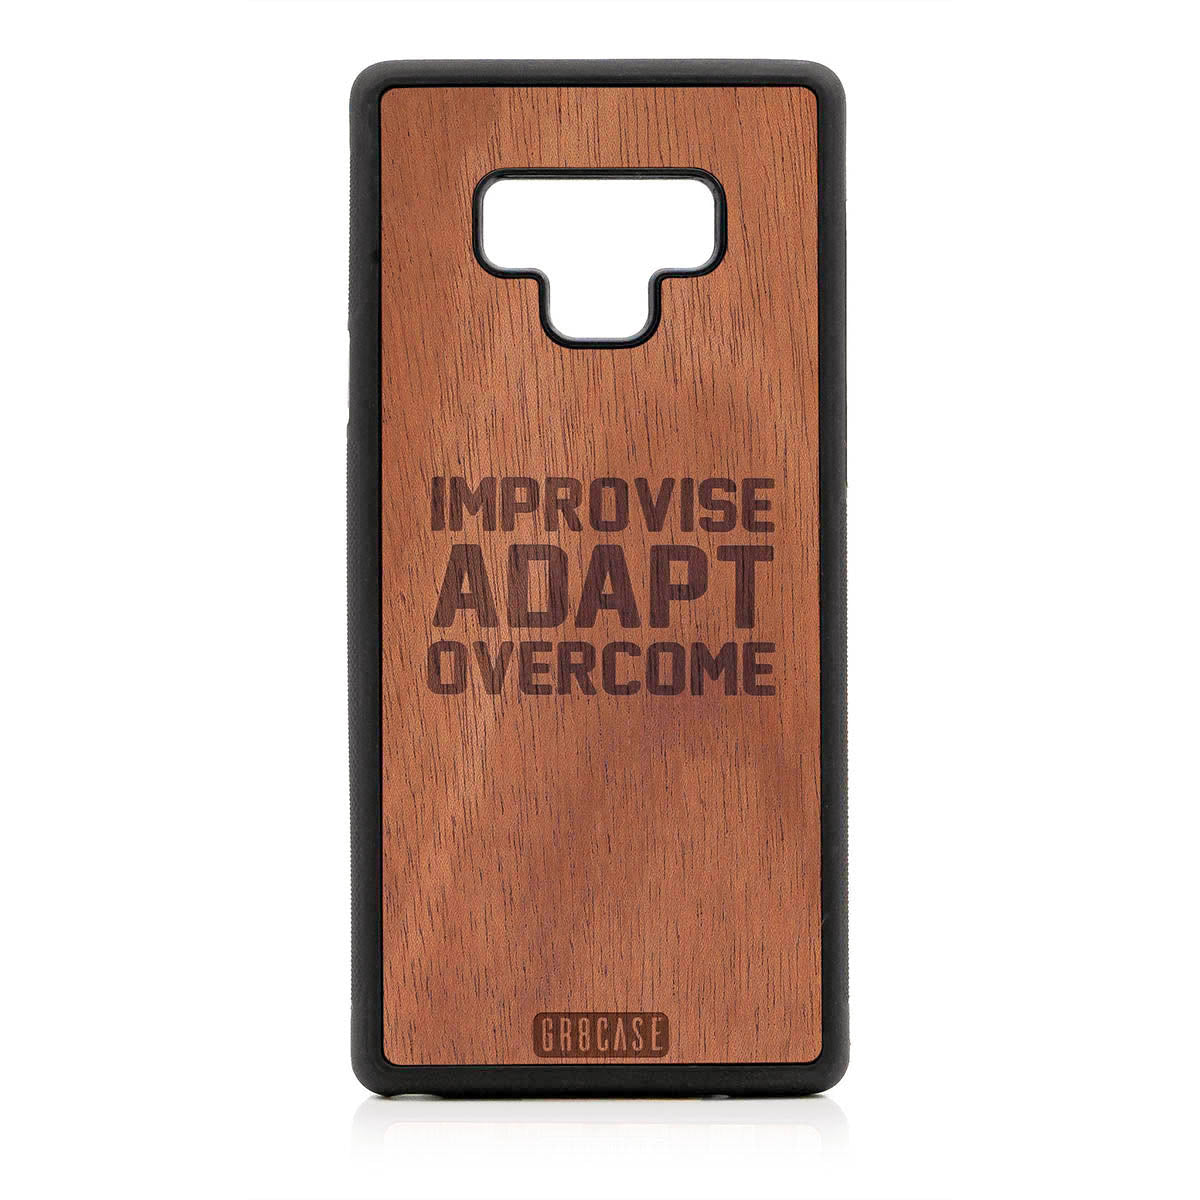 Improvise Adapt Overcome Design Wood Case For Samsung Galaxy Note 9